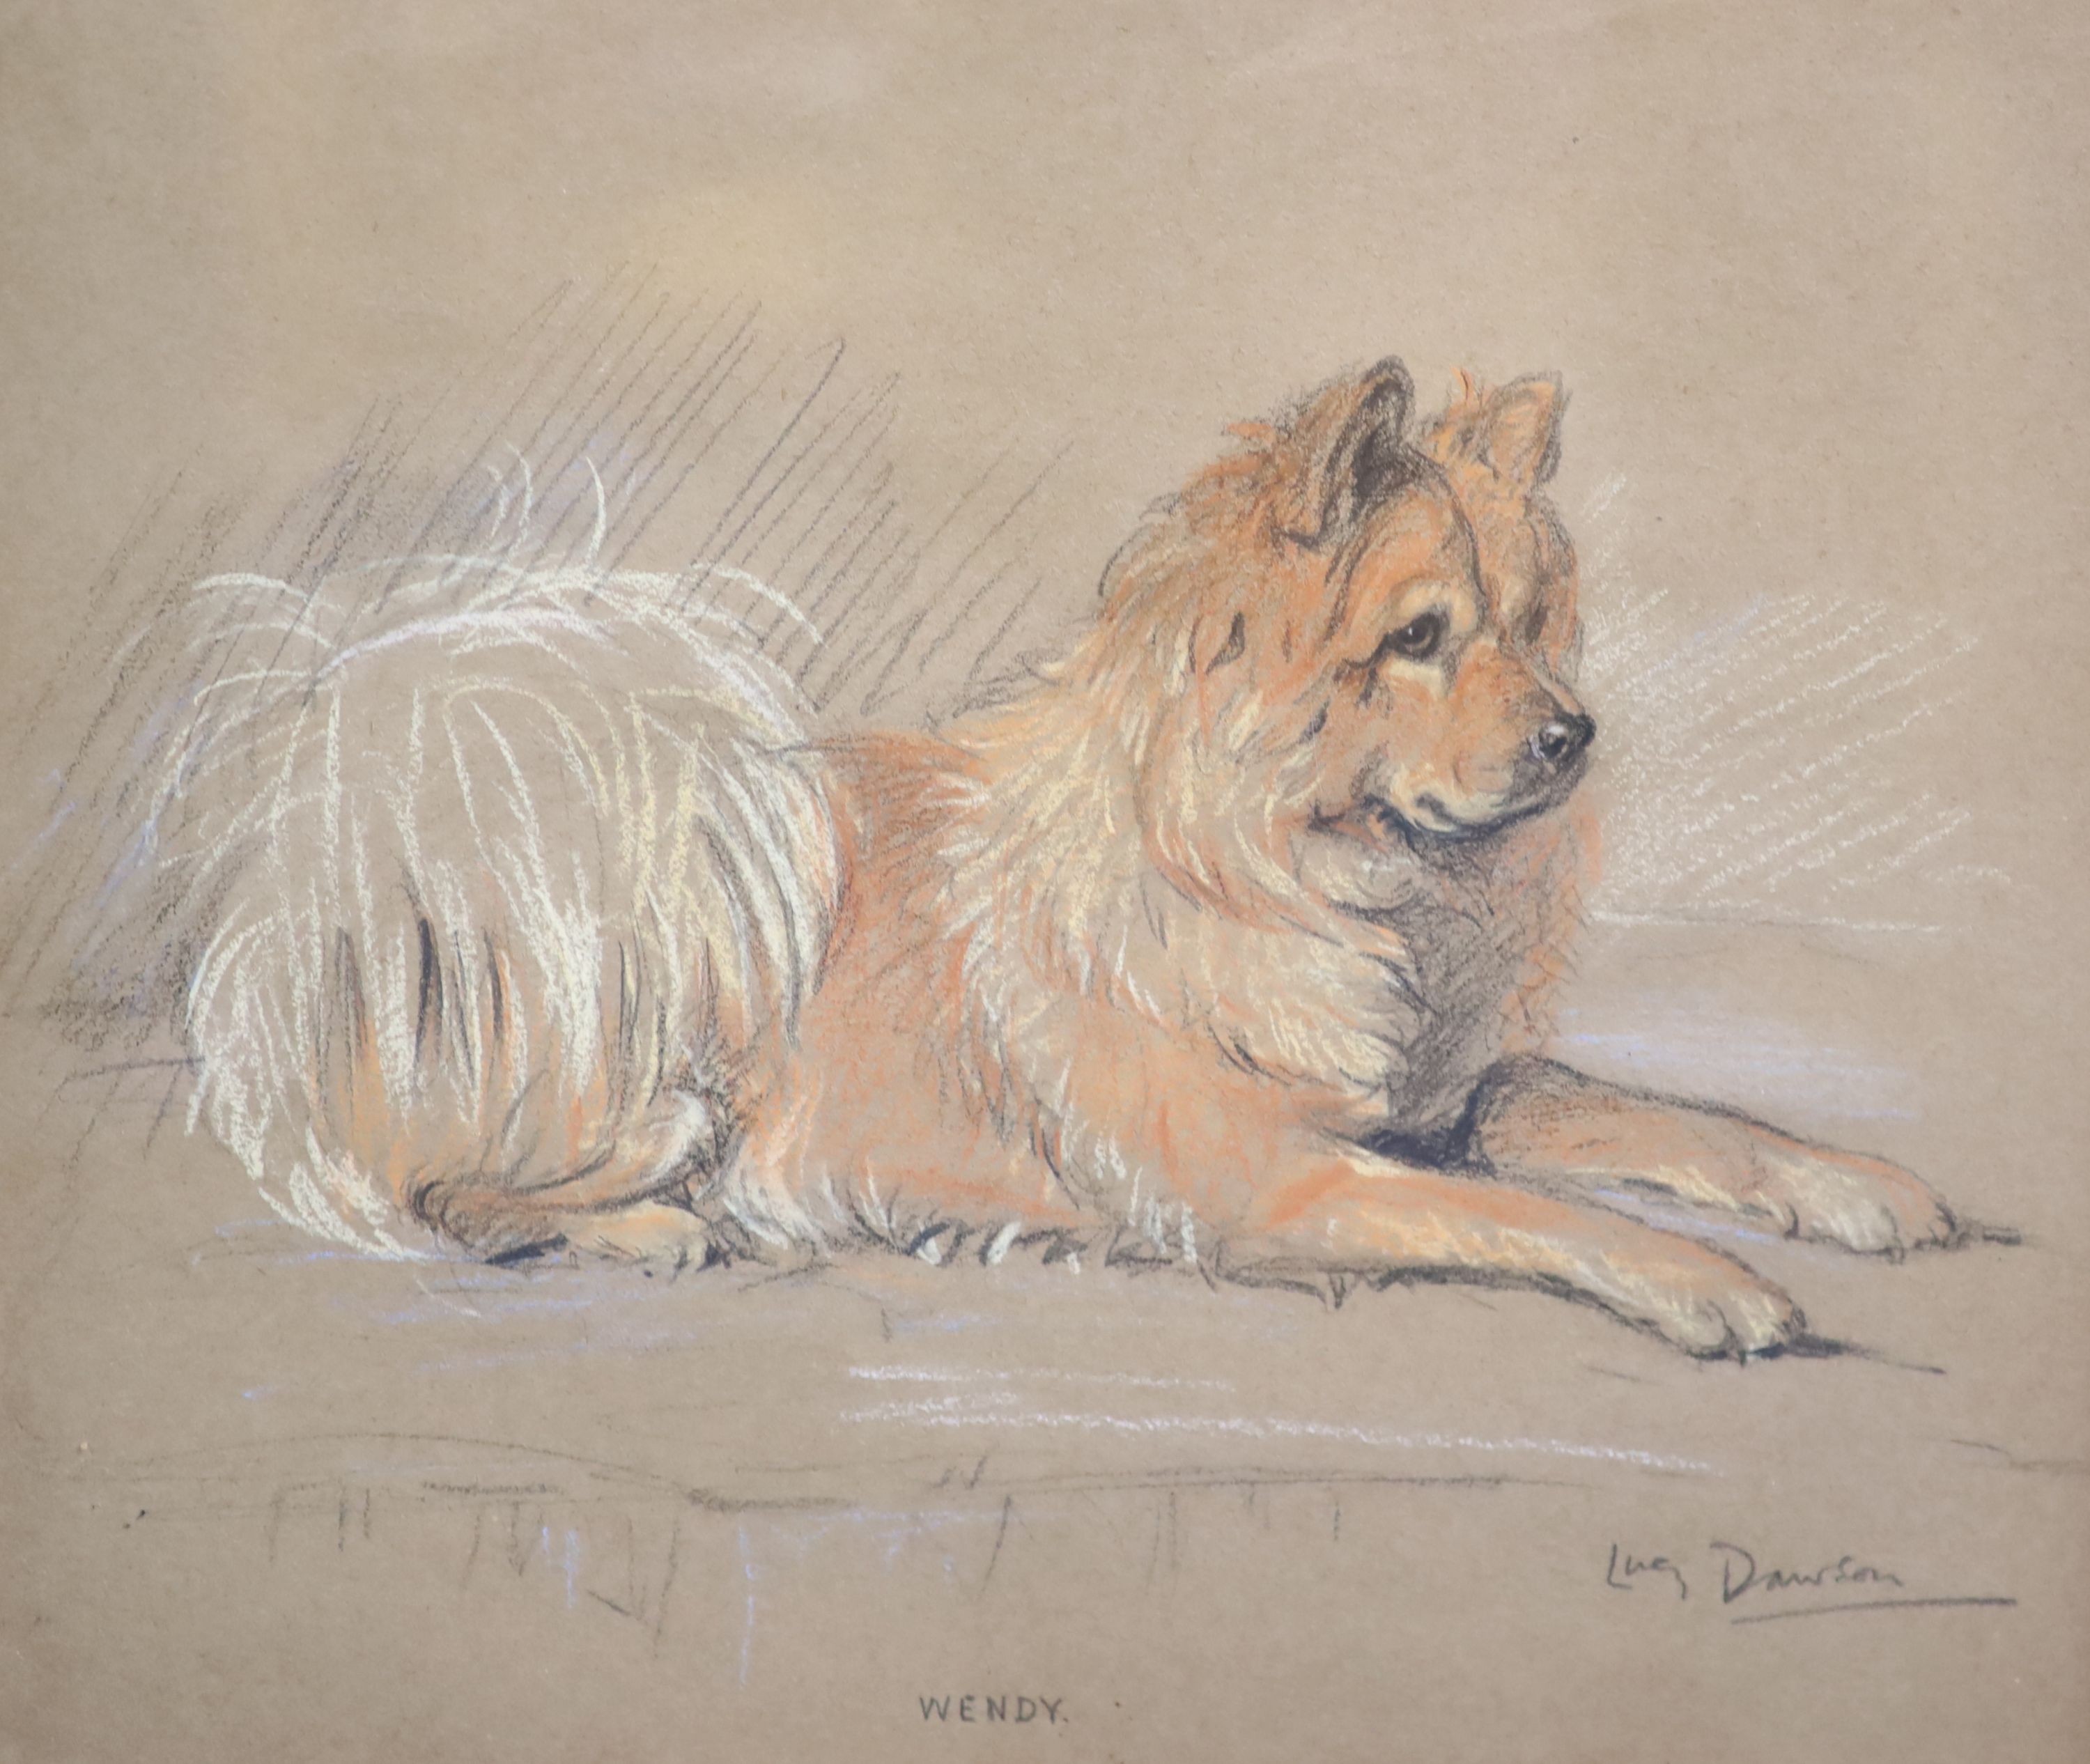 Lucy Dawson (1867-1954), Portrait of a Chow Chow Dog, pastel on brown paper, 23 x 27.5cm